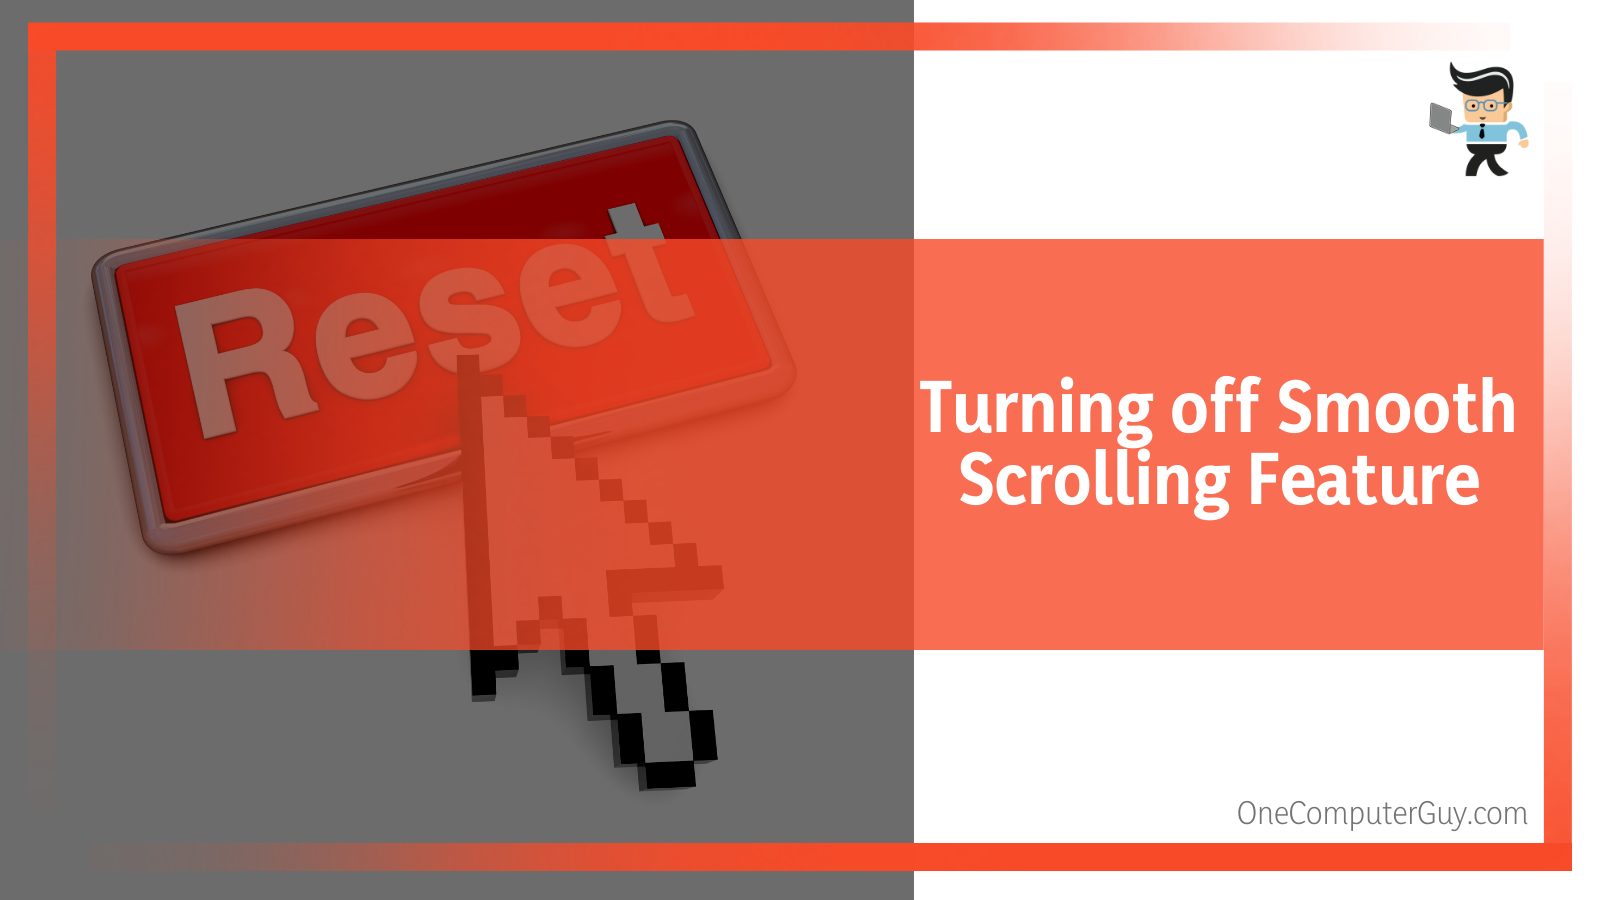 Turning off the Smooth Scrolling Feature